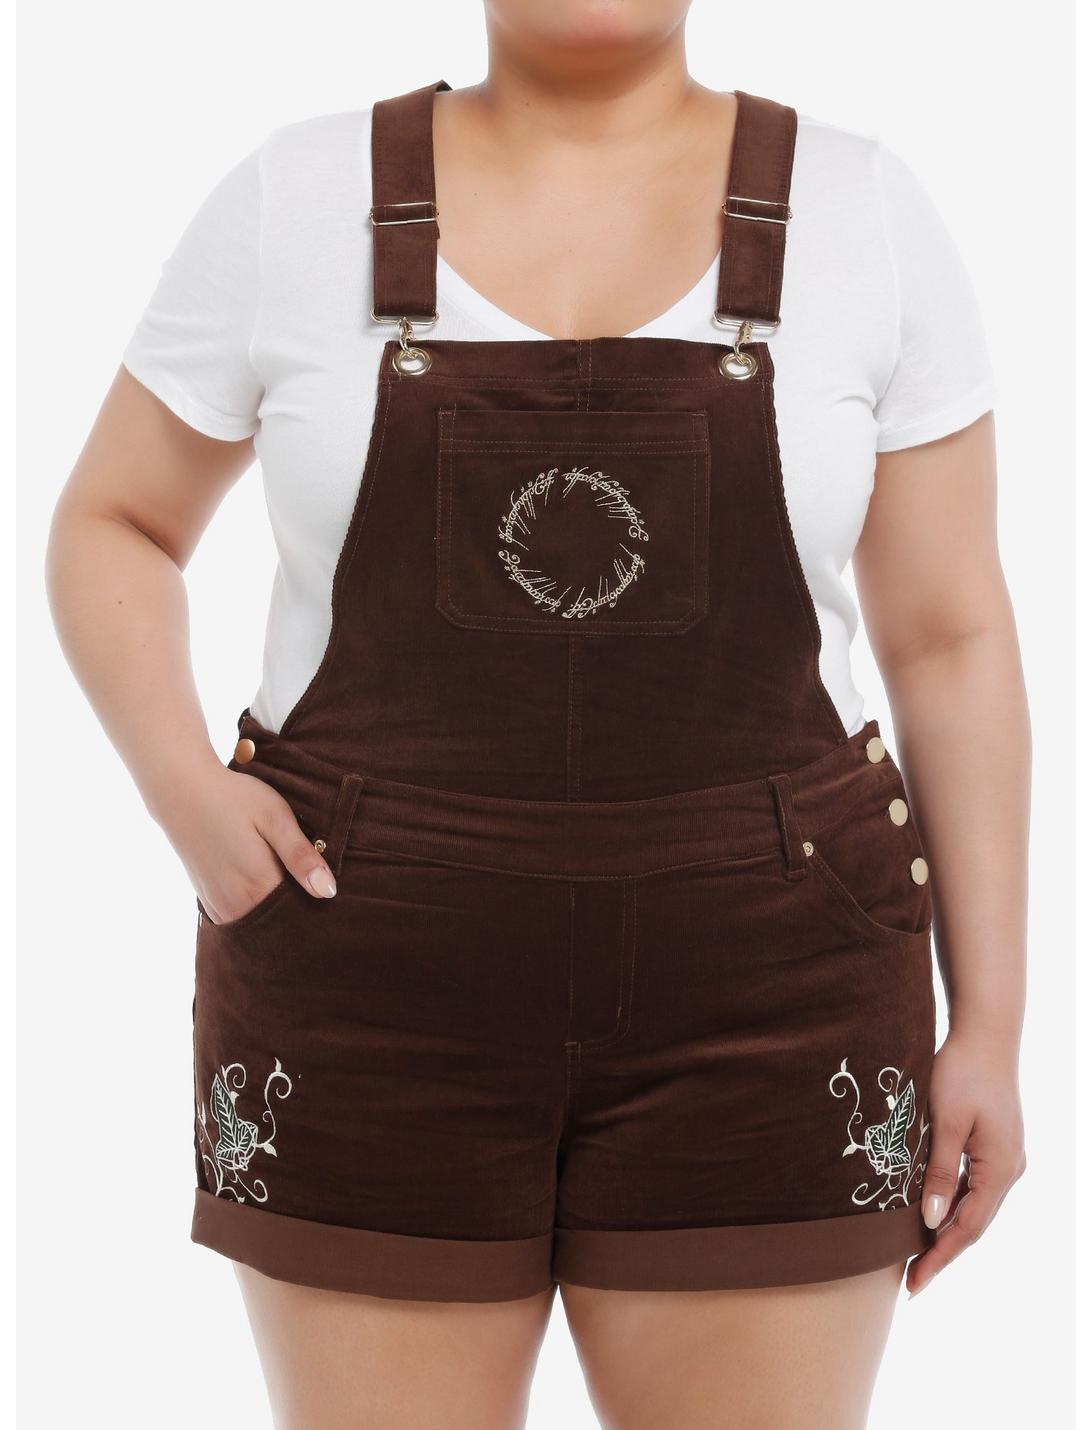 The Lord Of The Rings The One Ring Corduroy Shortalls Plus Size, BROWN, hi-res